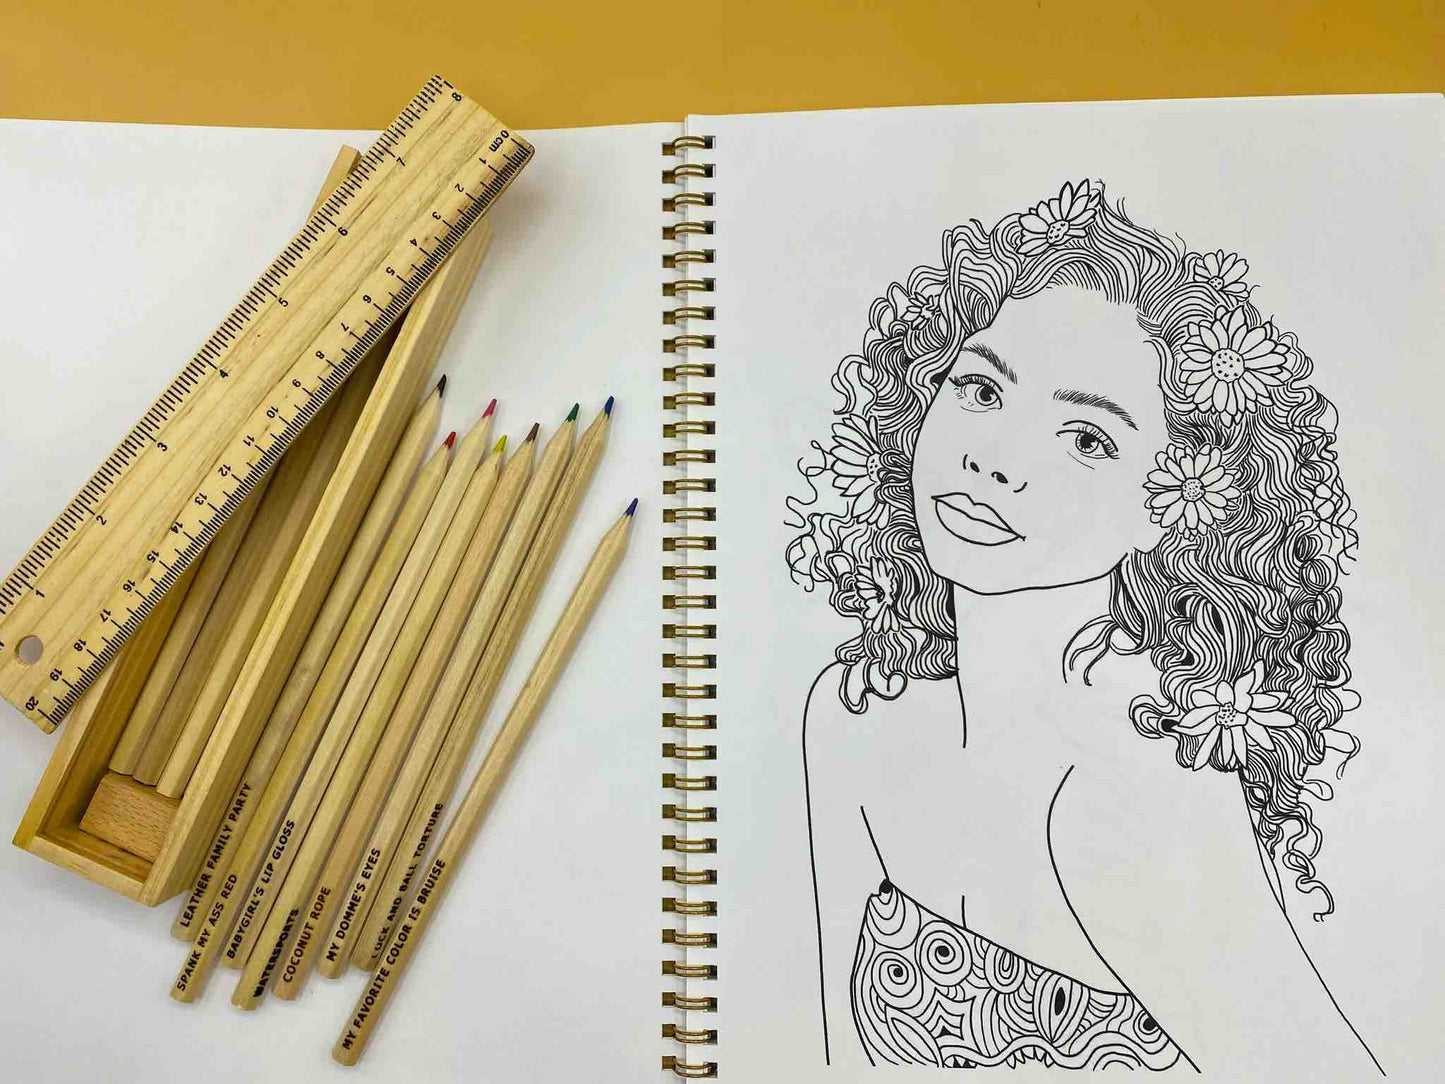 A page from Naughty and Nice: A Coloring Book for Babygirls: A girl in a tube top with flowers in her long wavy hair. Sitting atop the left page of the book is a box of colored pencils and a ruler.